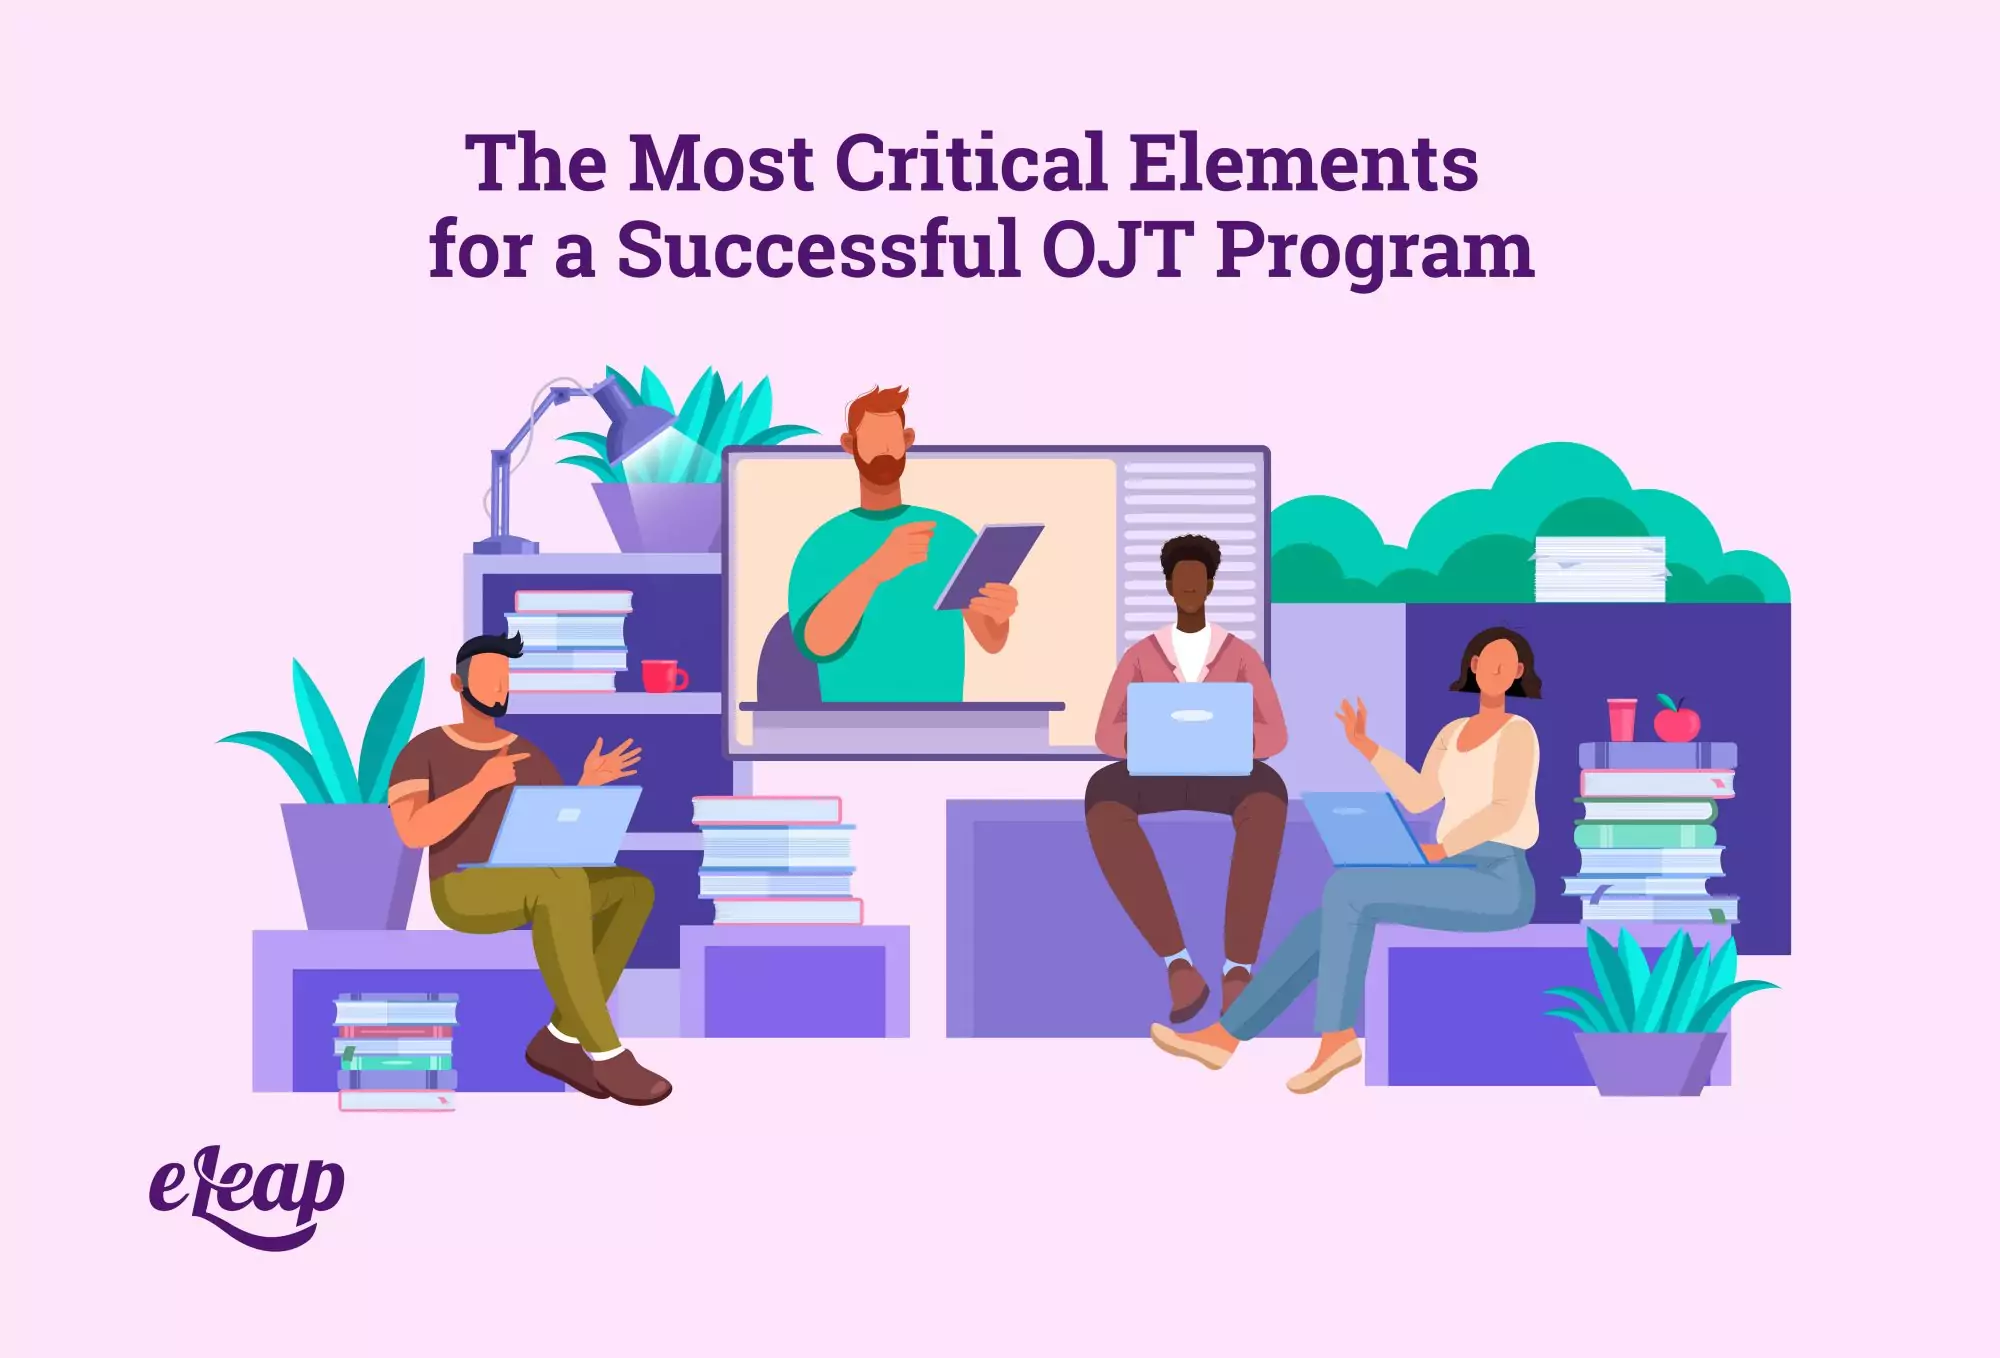 The Most Critical Elements for a Successful OJT Program